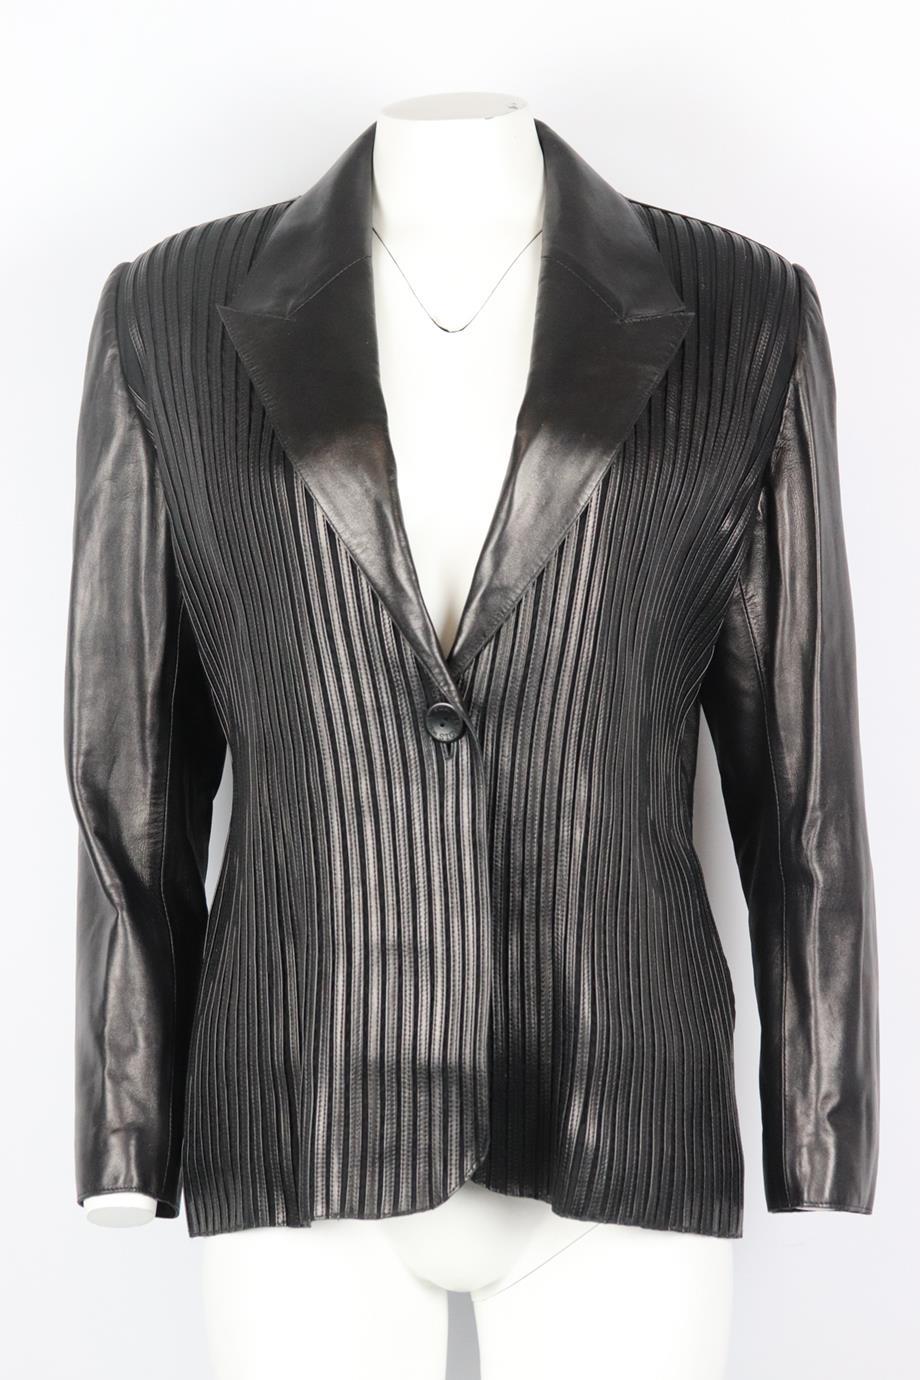 Jitrois vintage tulle and leather blazer. Black. Long sleeve, v-neck. Button fastening at front. 100% Lambskin; lining: 100% acetate. Size: FR 40 (UK 12, US 8, IT 44). Shoulder to shoulder: 17 in. Bust: 44 in. Waist: 38 in. Hips: 42 in. Length: 28